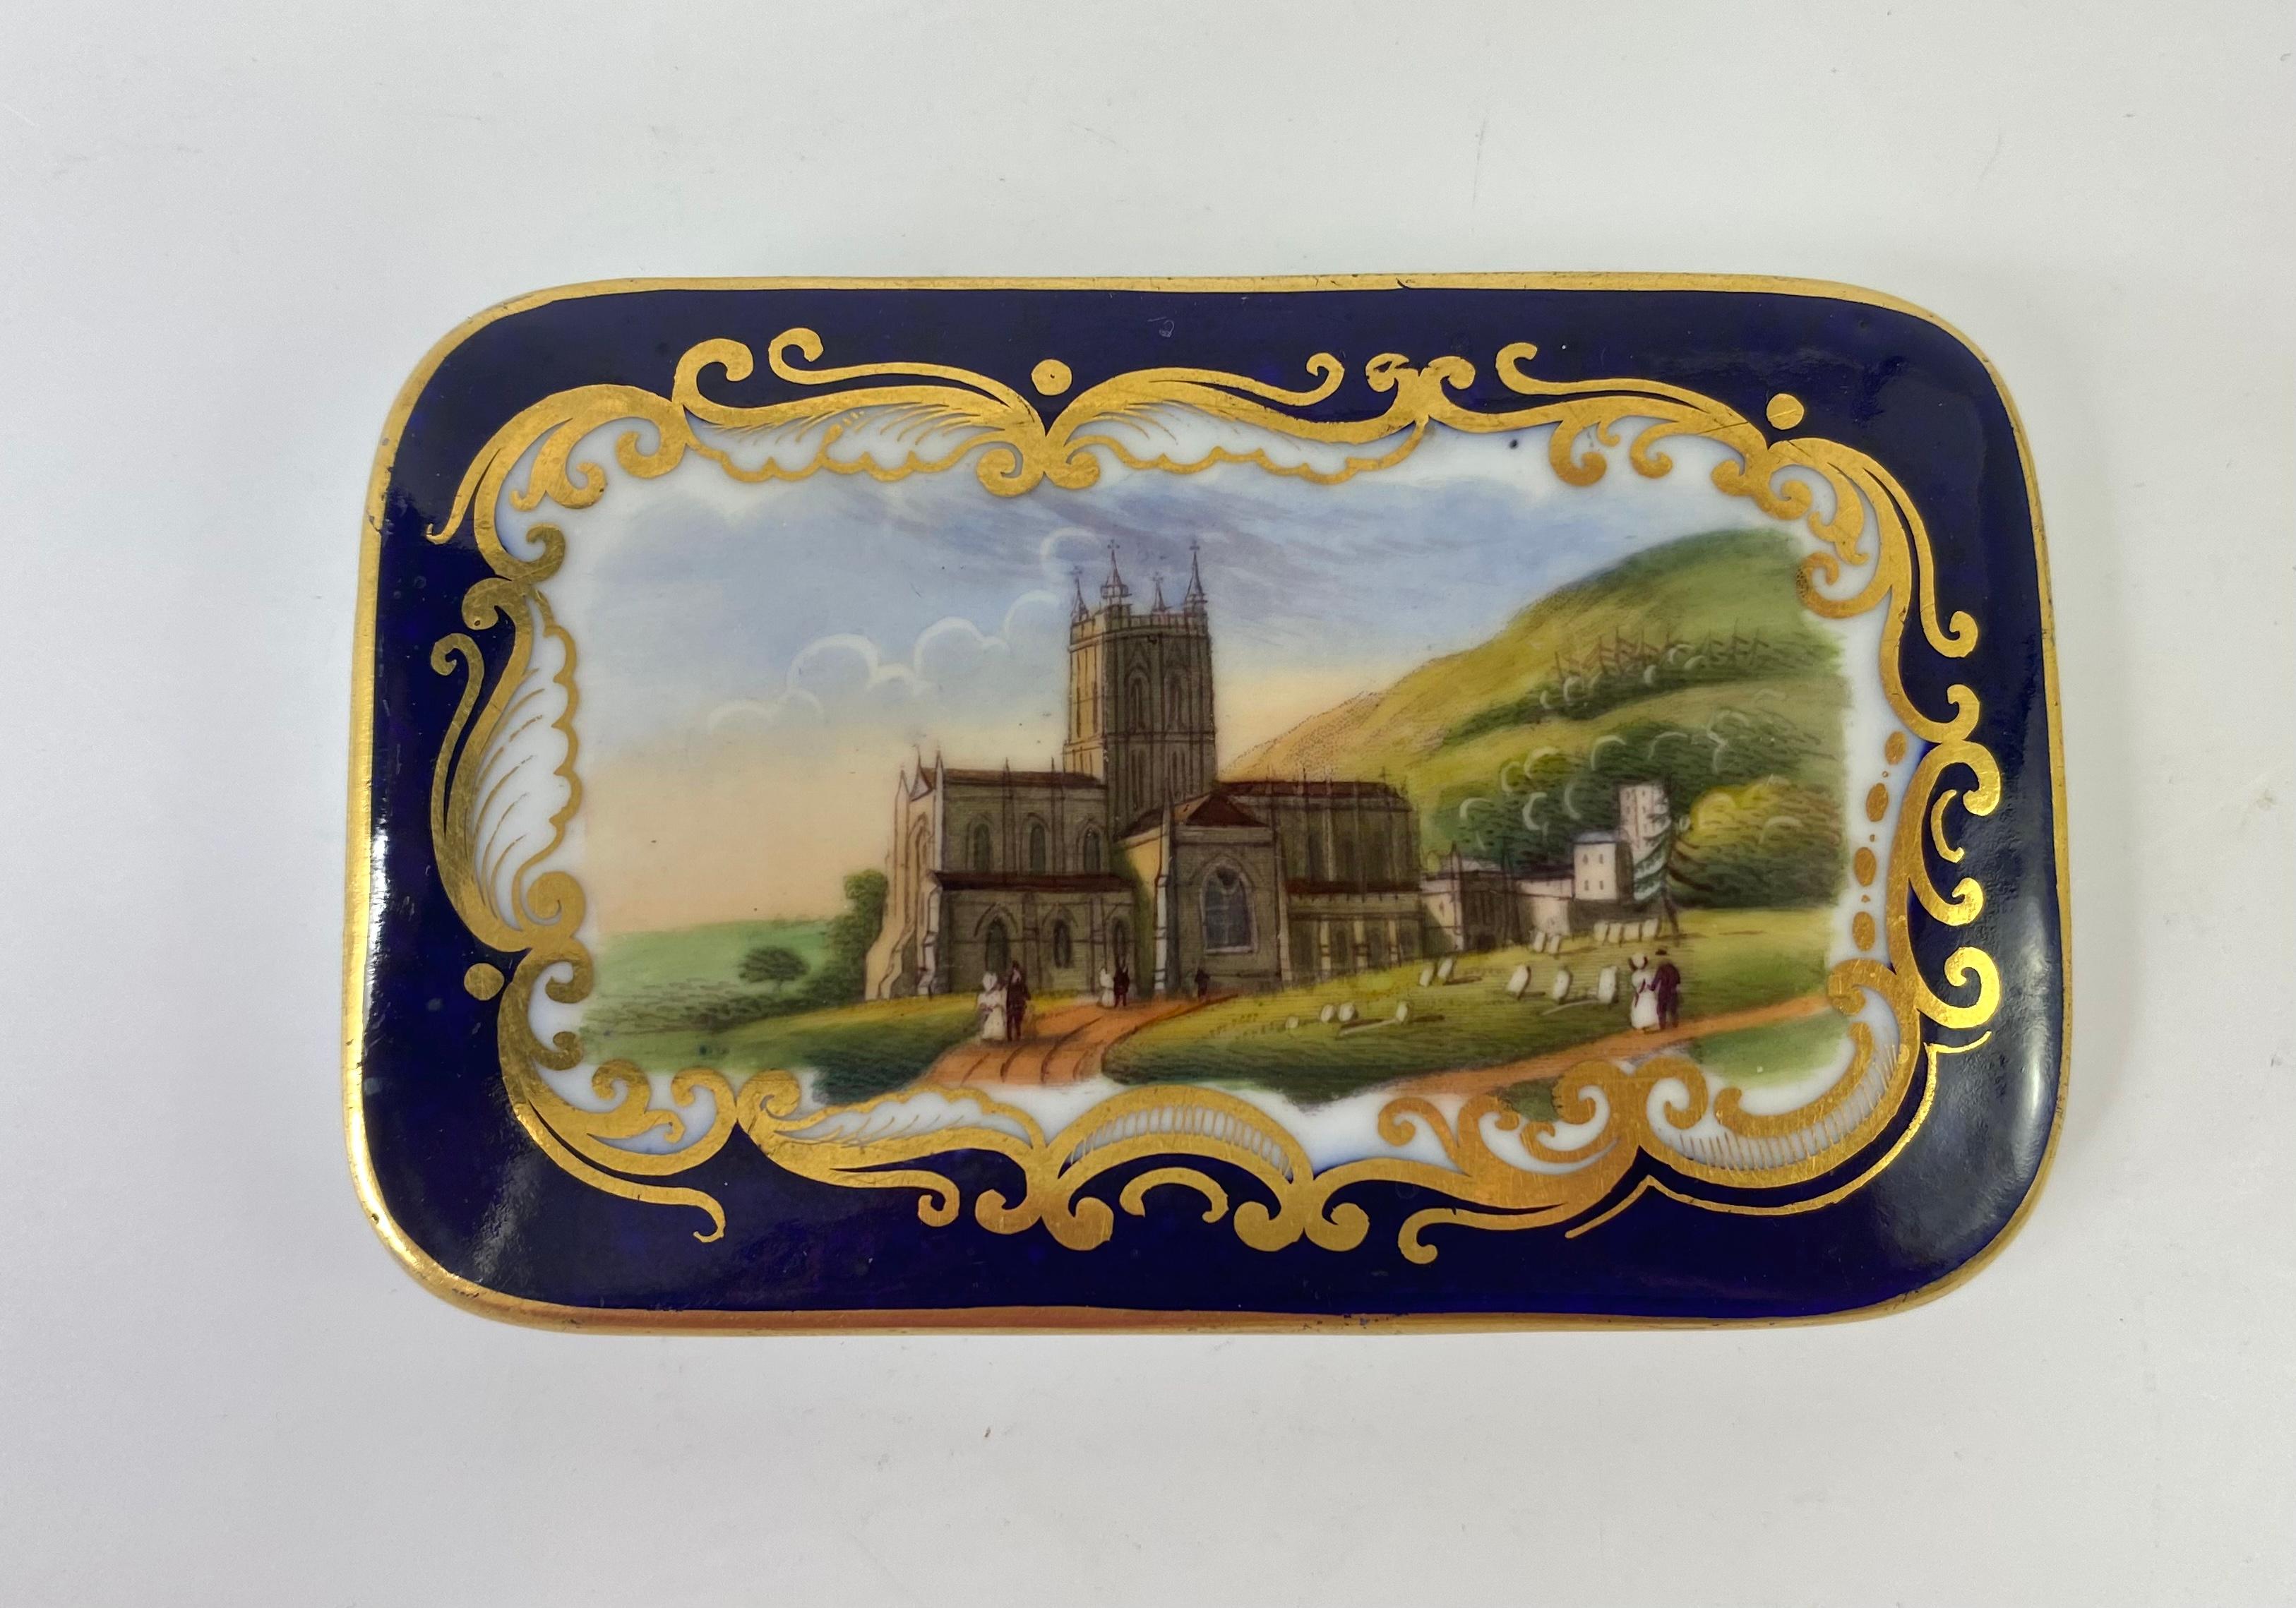 Chamberlain Worcester porcelain box and cover, c. 1840. The cover painted with a titled view of ‘Malvern’, of figures before the church, beneath the hills, within a gilt scroll framed panels, on an underglaze cobalt blue ground.
The base in cobalt